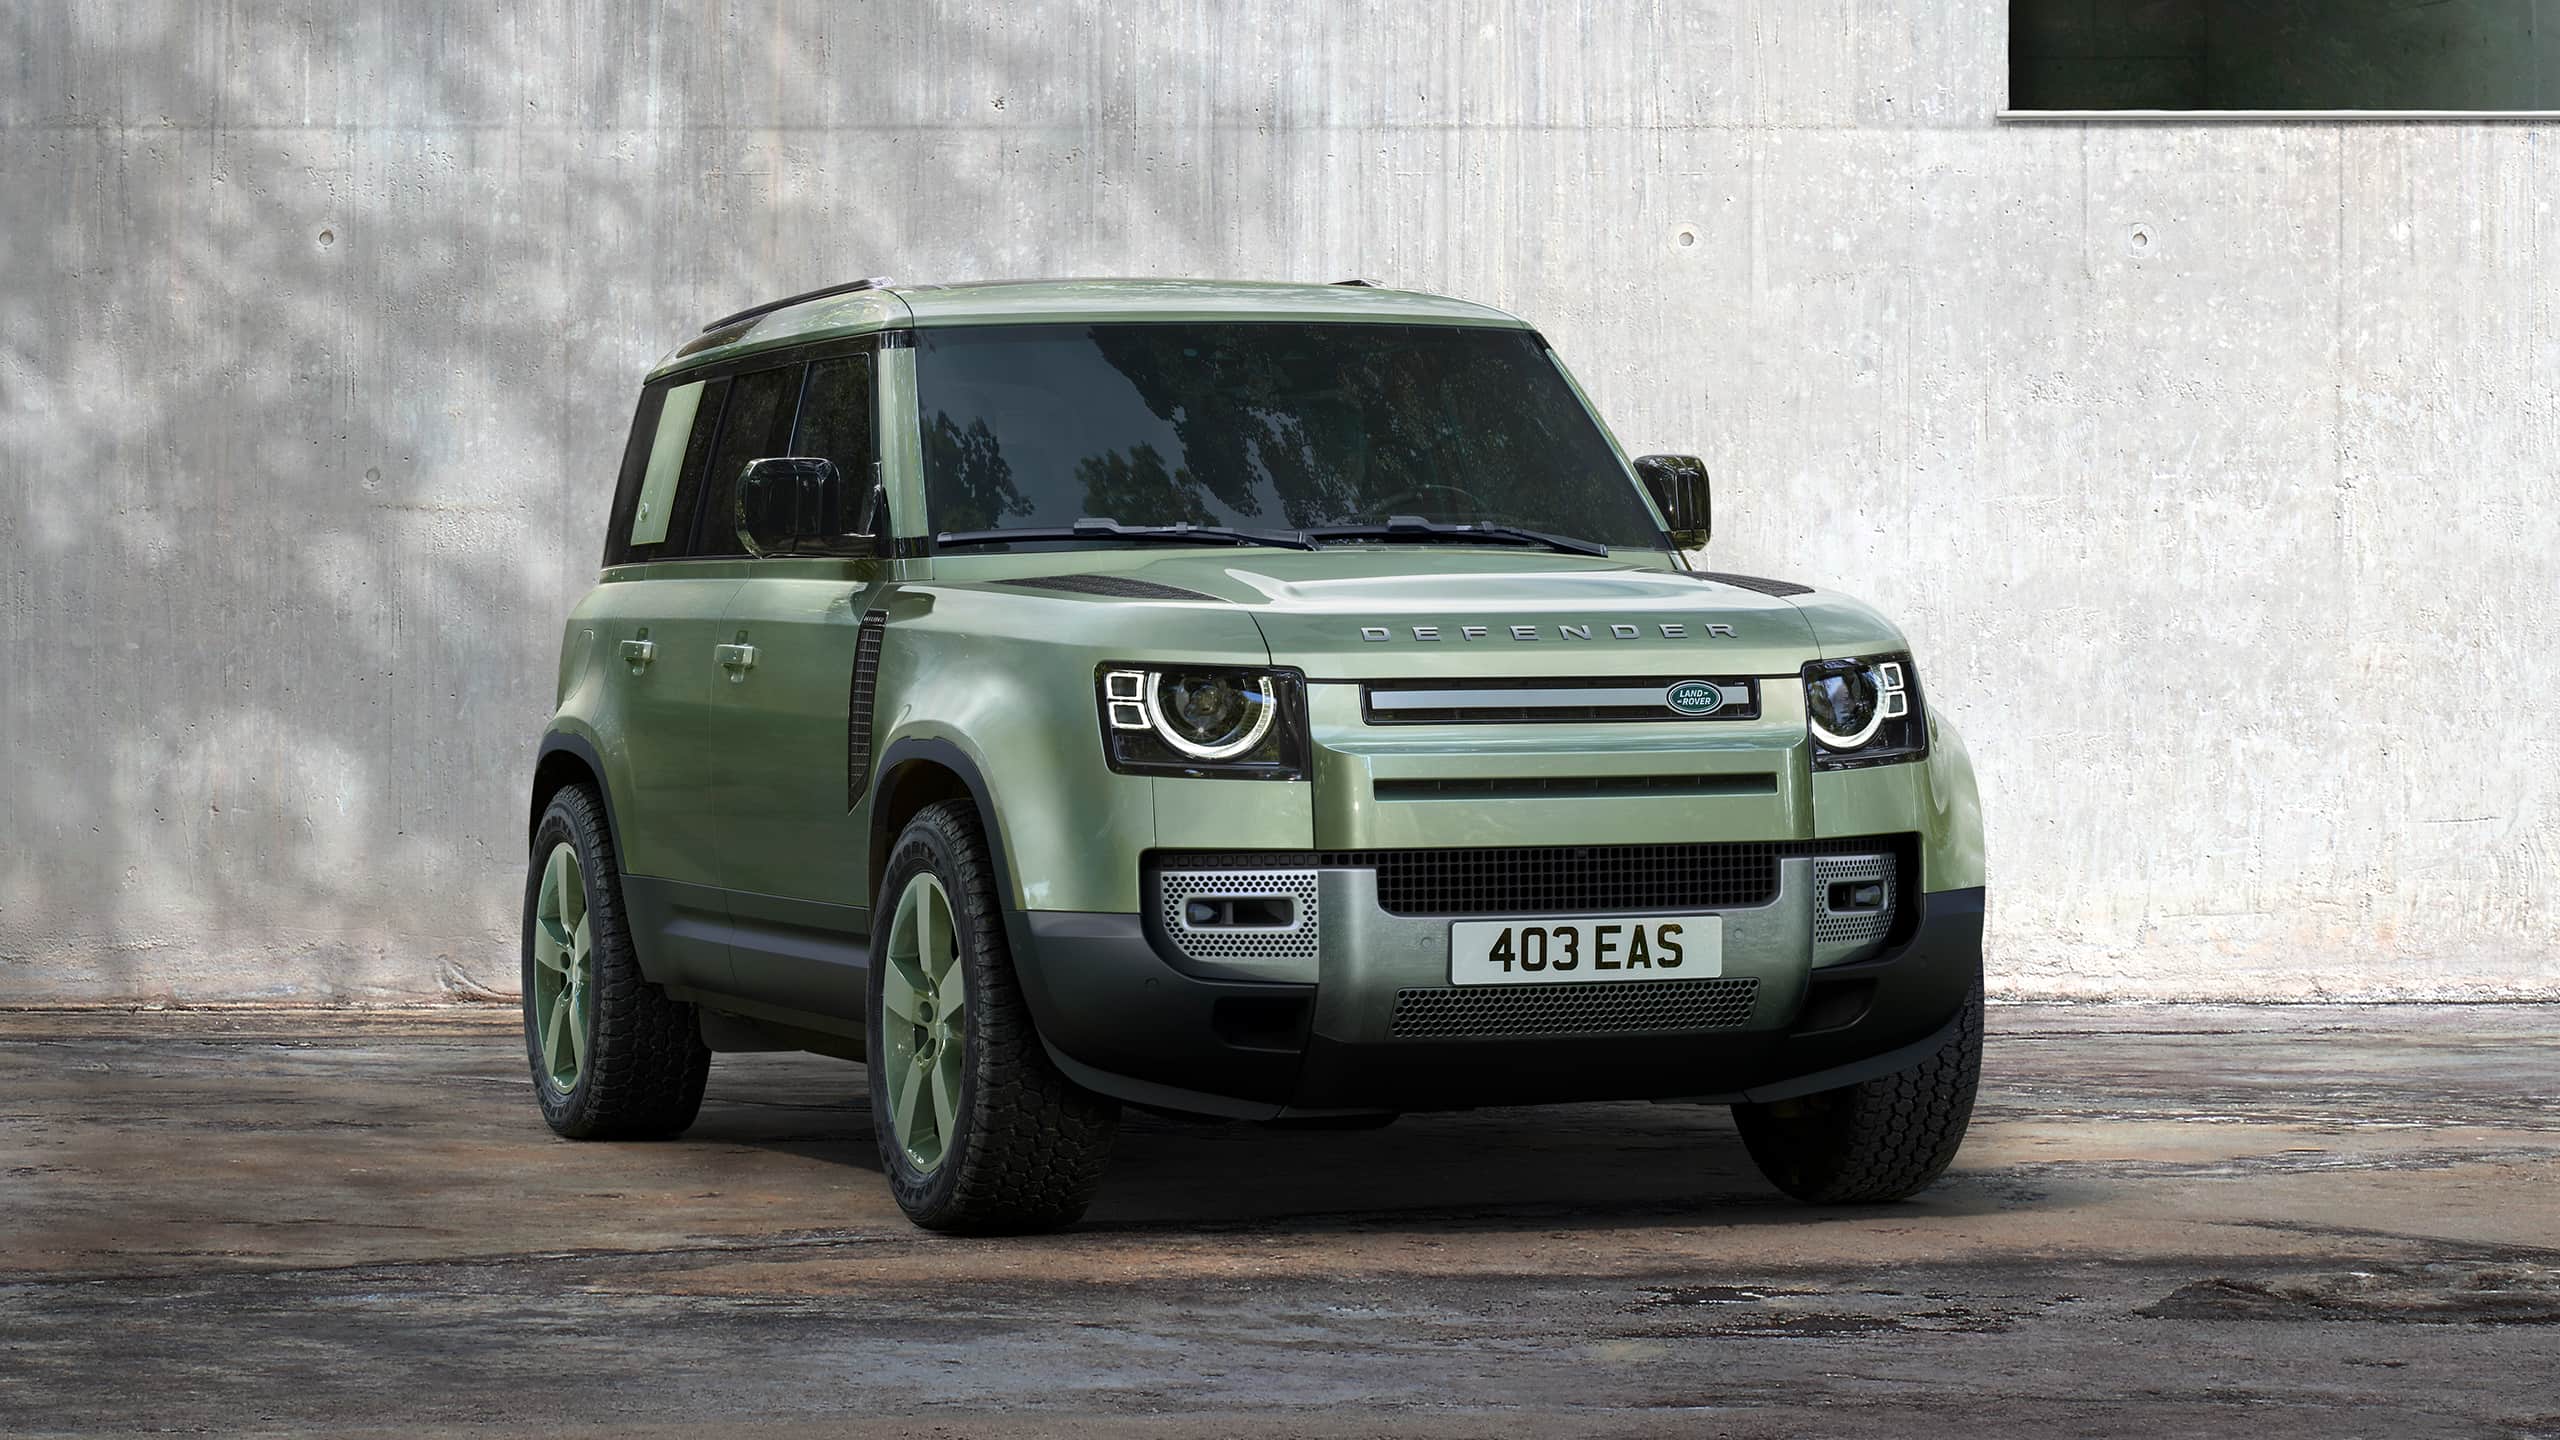 The SUV gets the exclusive Grasmere Green colour